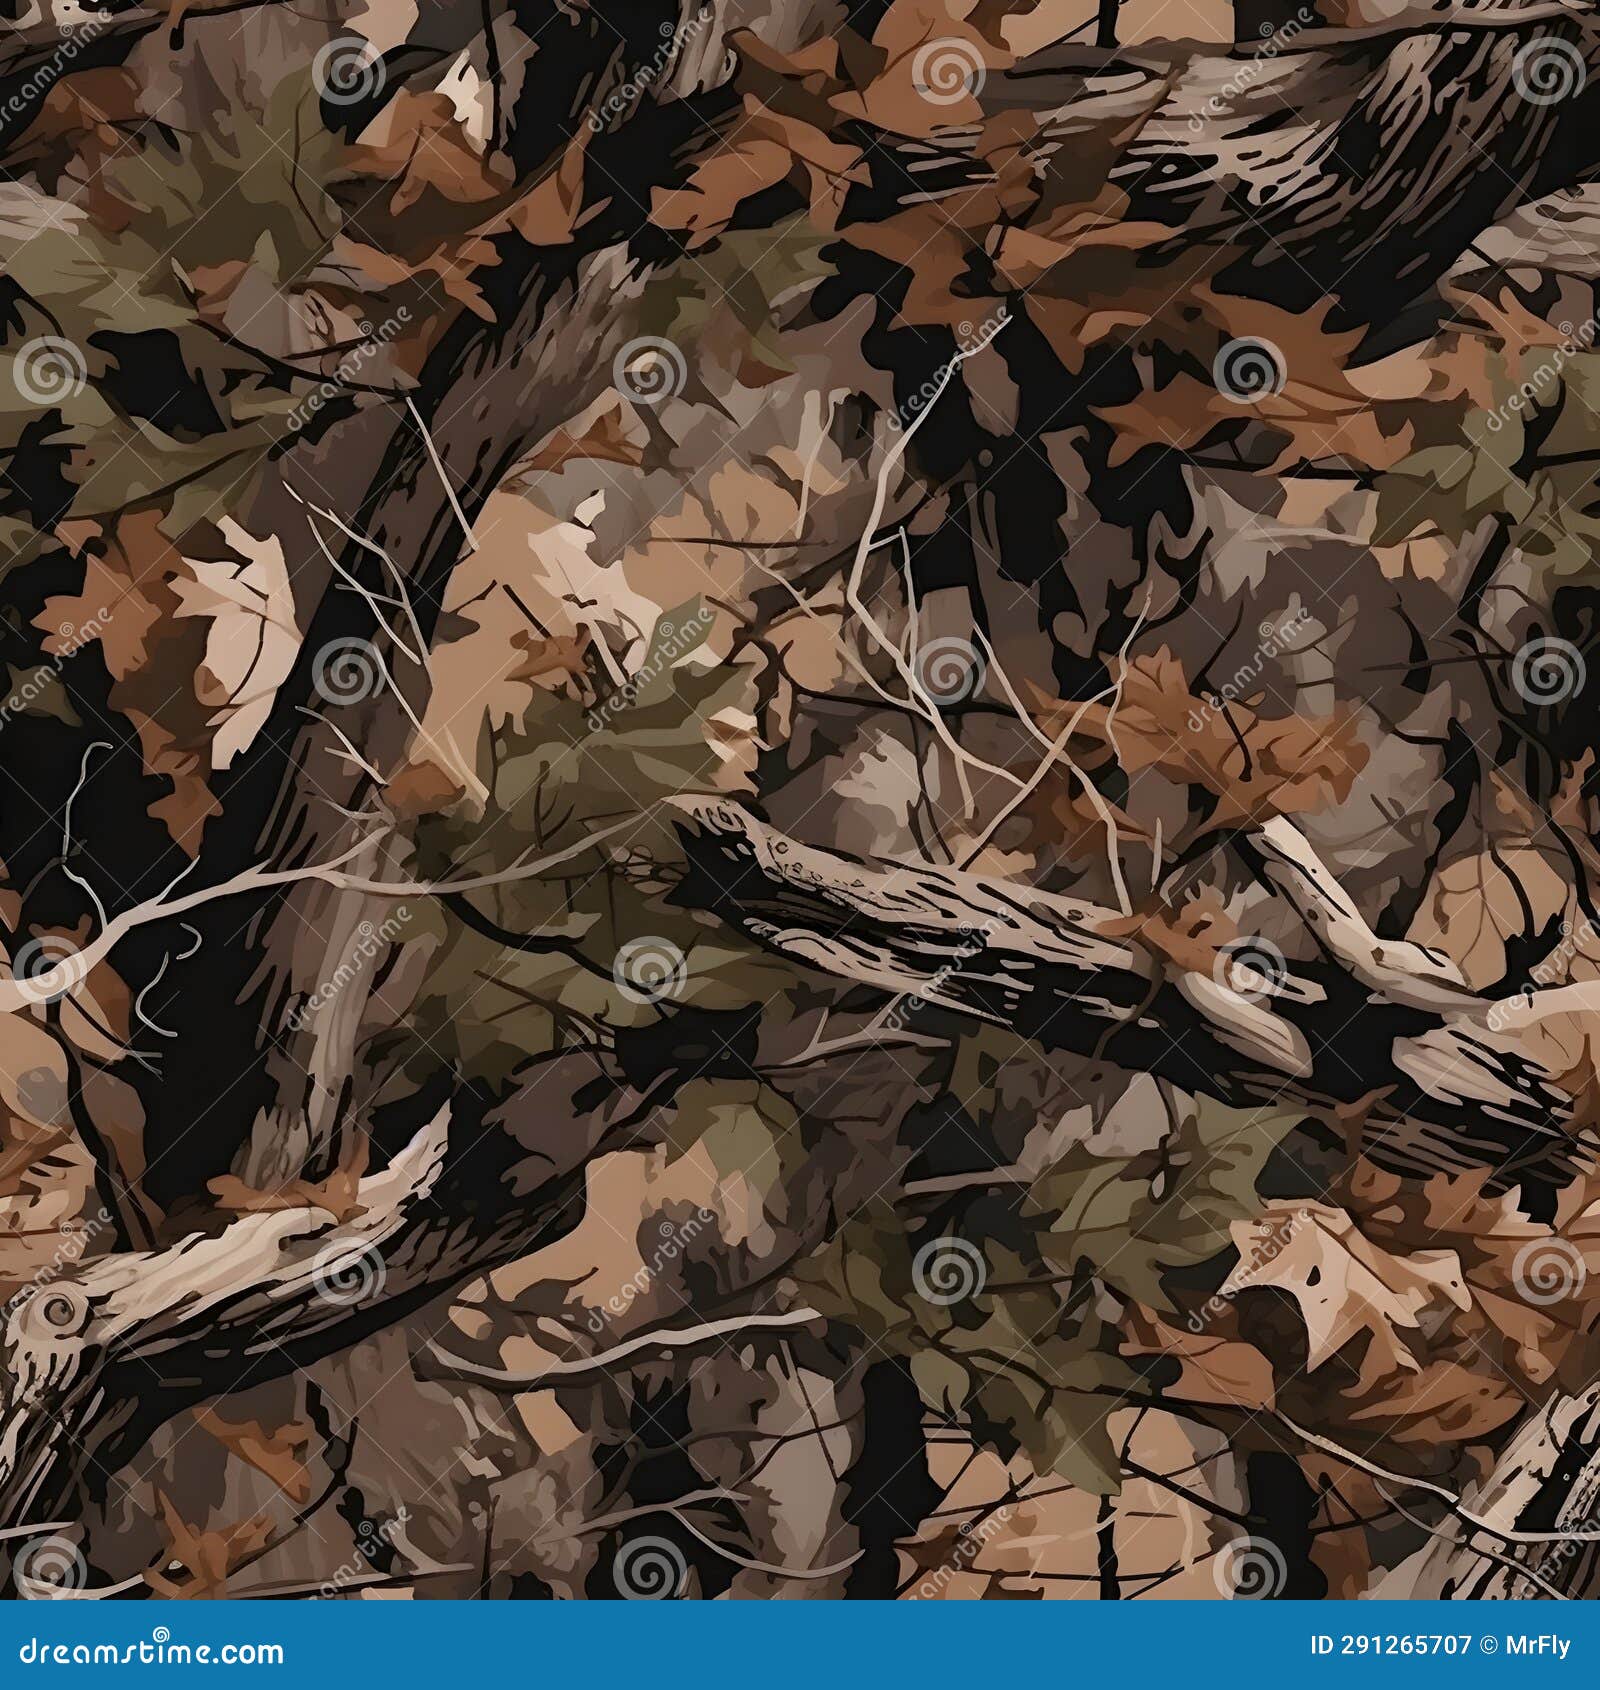 Realistic Camouflage Seamless Pattern. Hunting Camo for Cloth, Weapons or  Vechicles Stock Illustration - Illustration of vechicles, wallpaper:  291265707